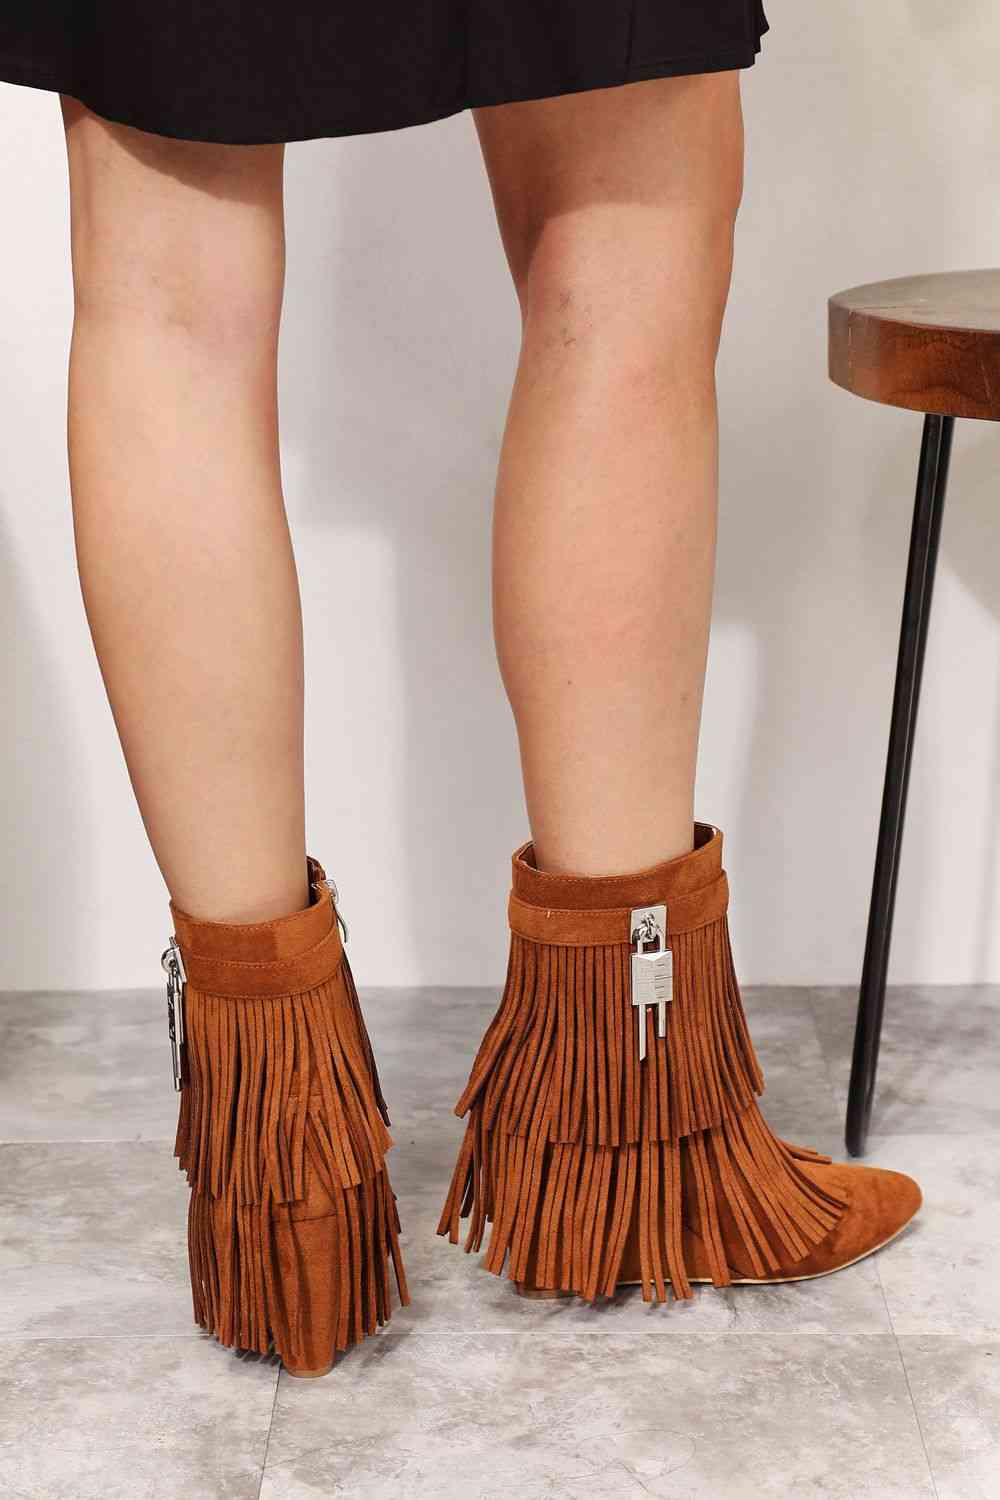 A woman's feet in a pair of Legend Women's Tassel Wedge Heel Ankle Booties by Trendsi with an open shank design, made with vegan suede.